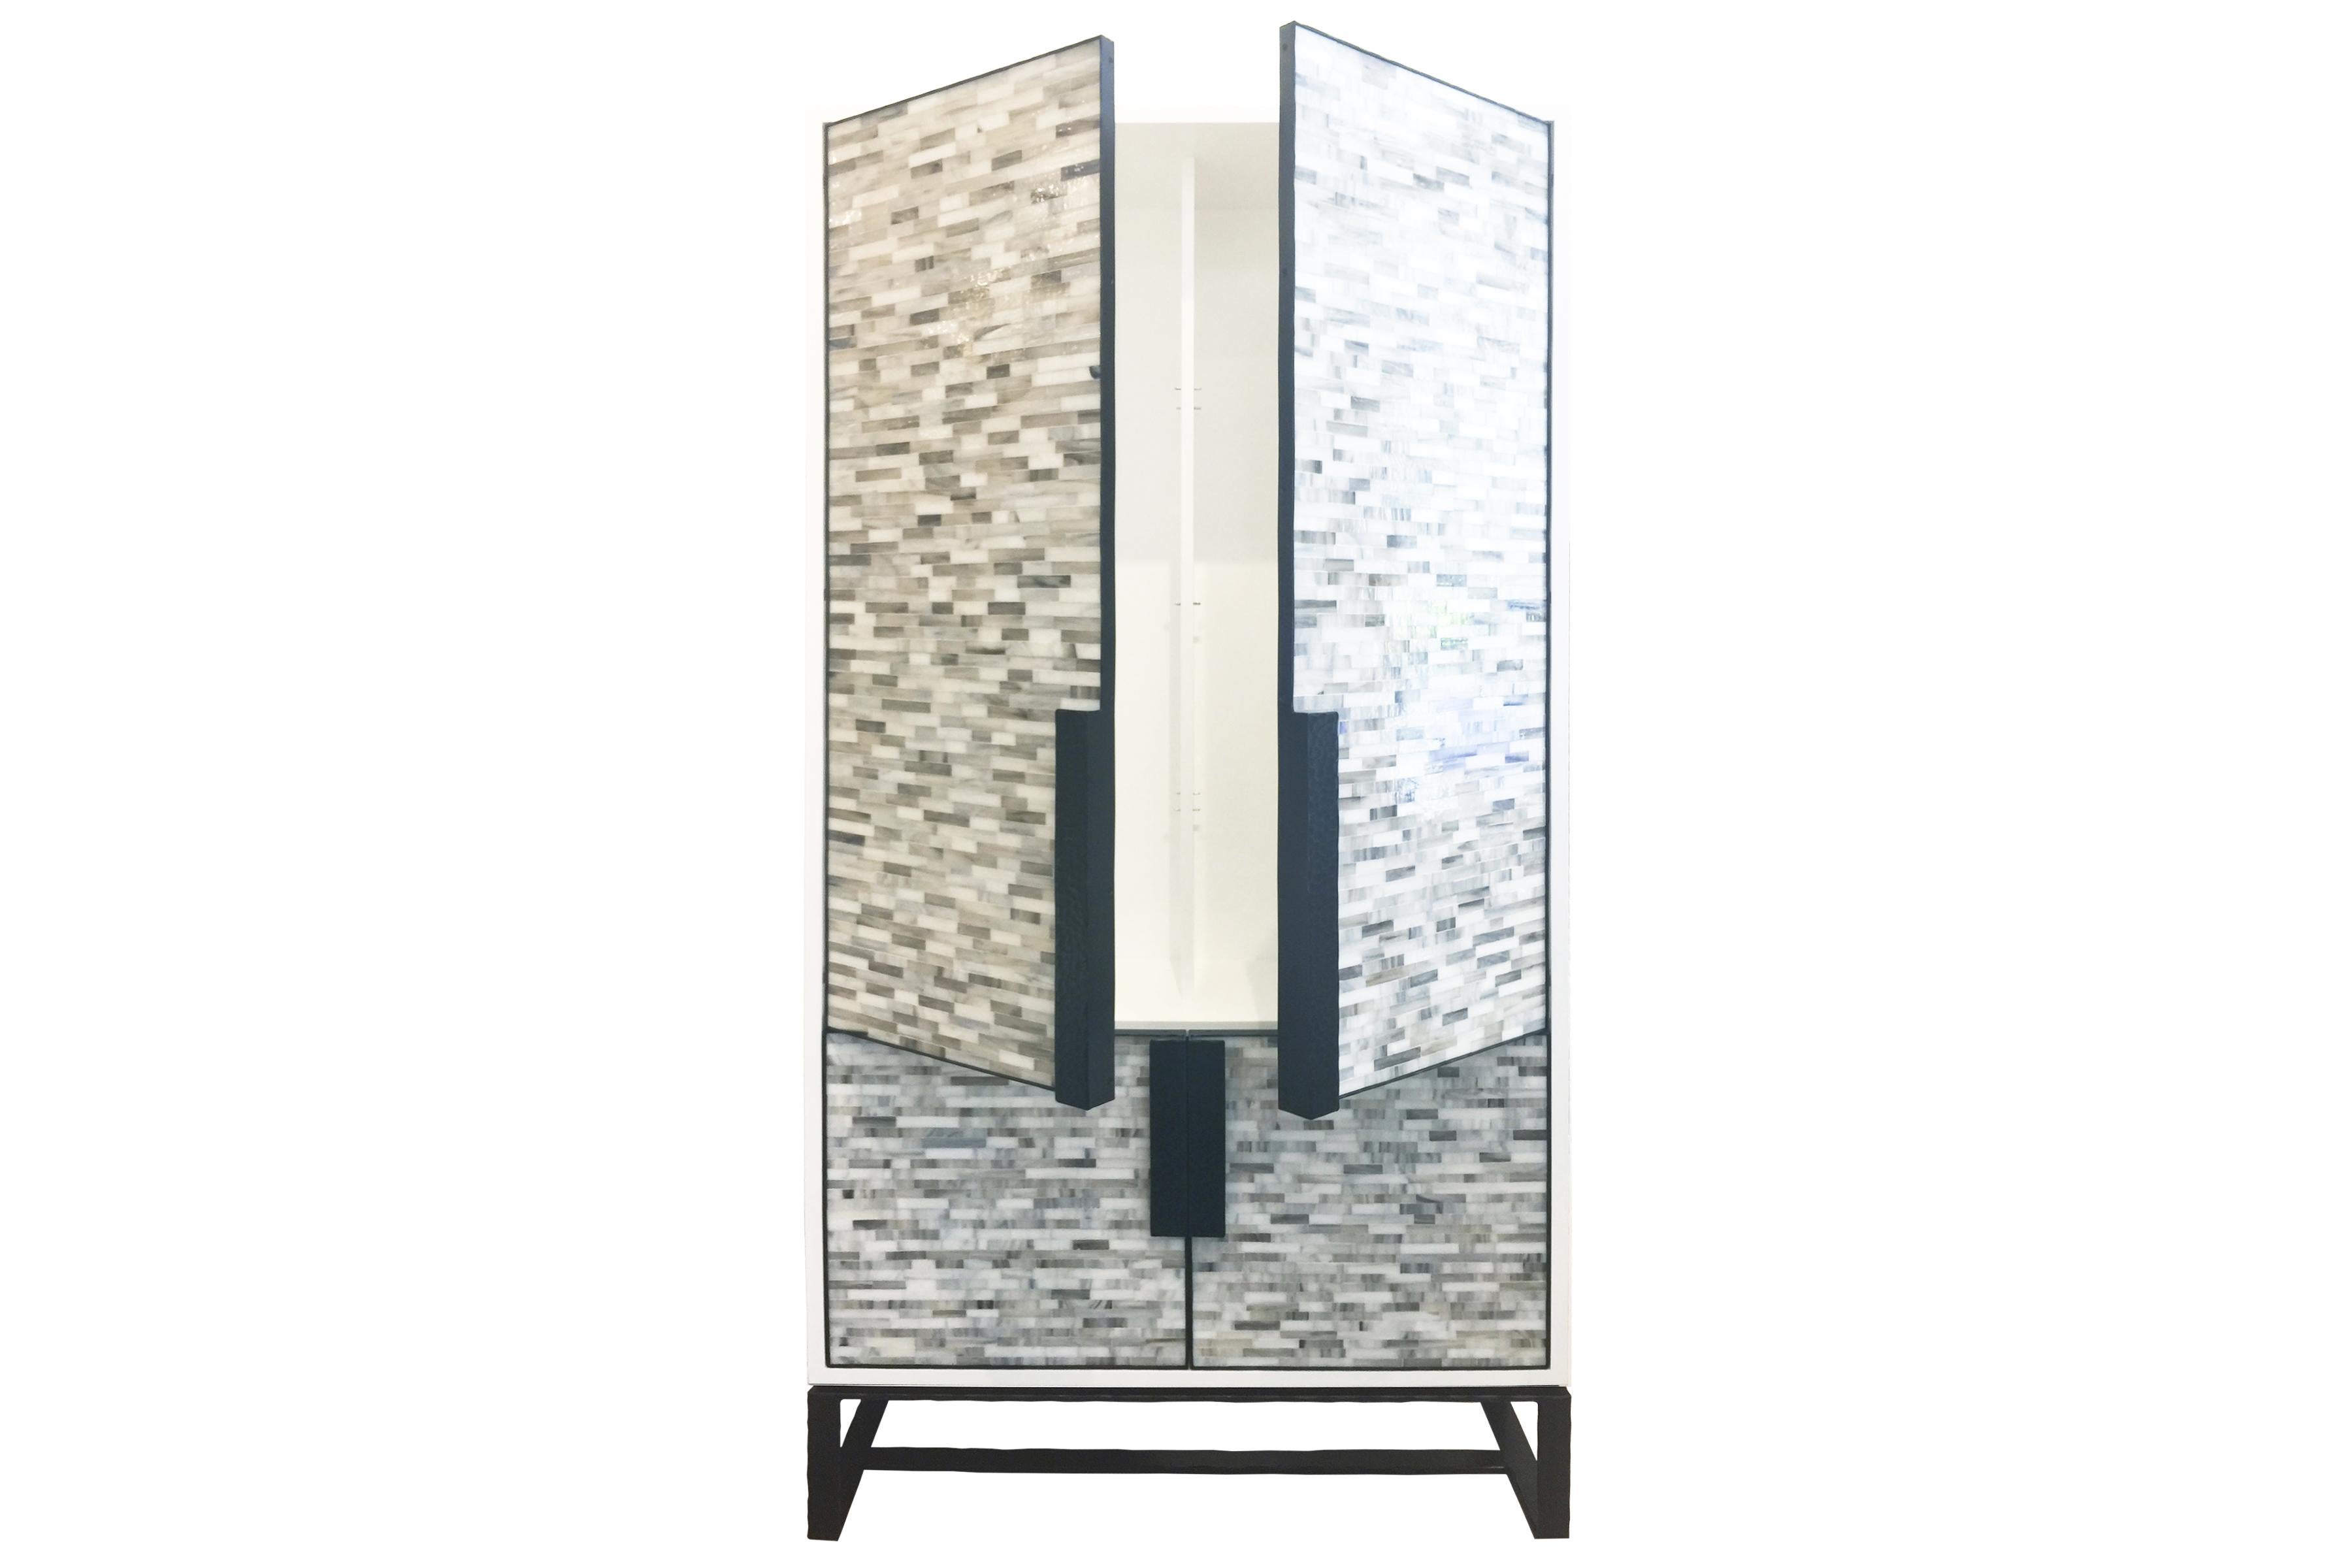 The Chelsea bar cabinet by Ercole Home has a 4-door front, with white lacquer wood finish on oak.
Hand cut glass mosaics in London grey and icy white decorate the surface in Luis pattern.
Hand-hammered metal framed doors, handles, and base in